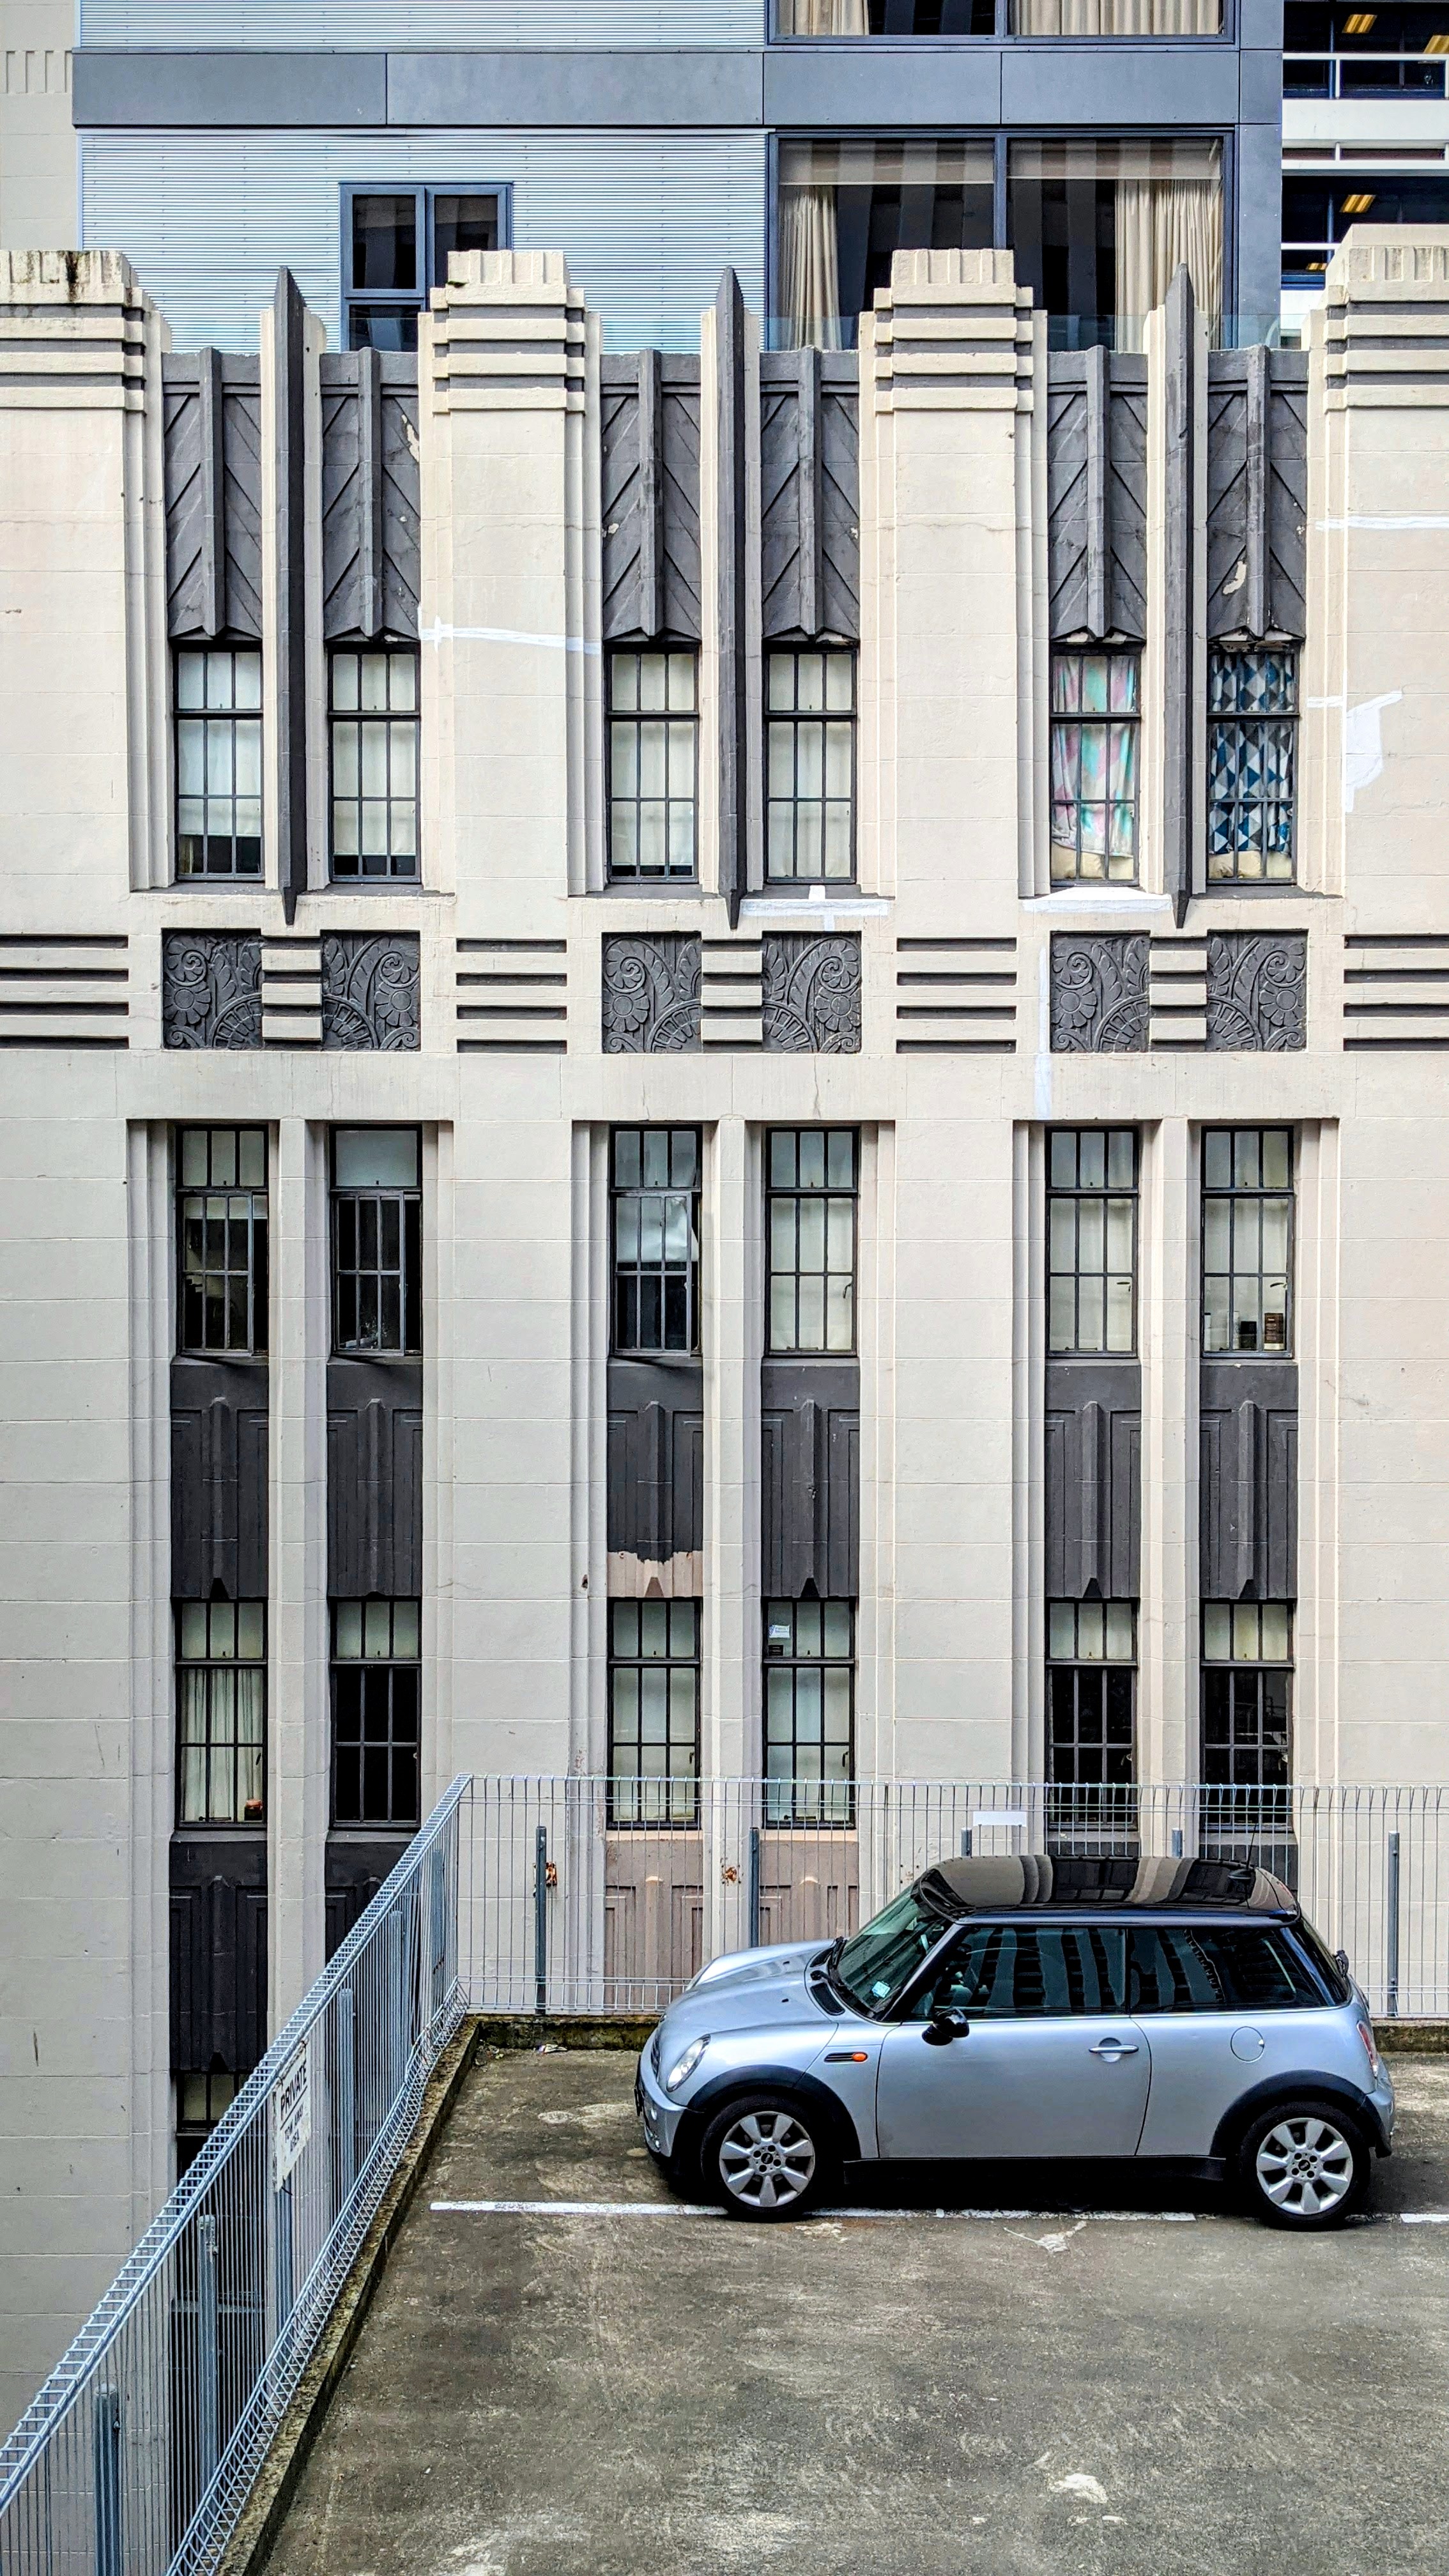 Car parked on a roof against an art deco high-rise backd